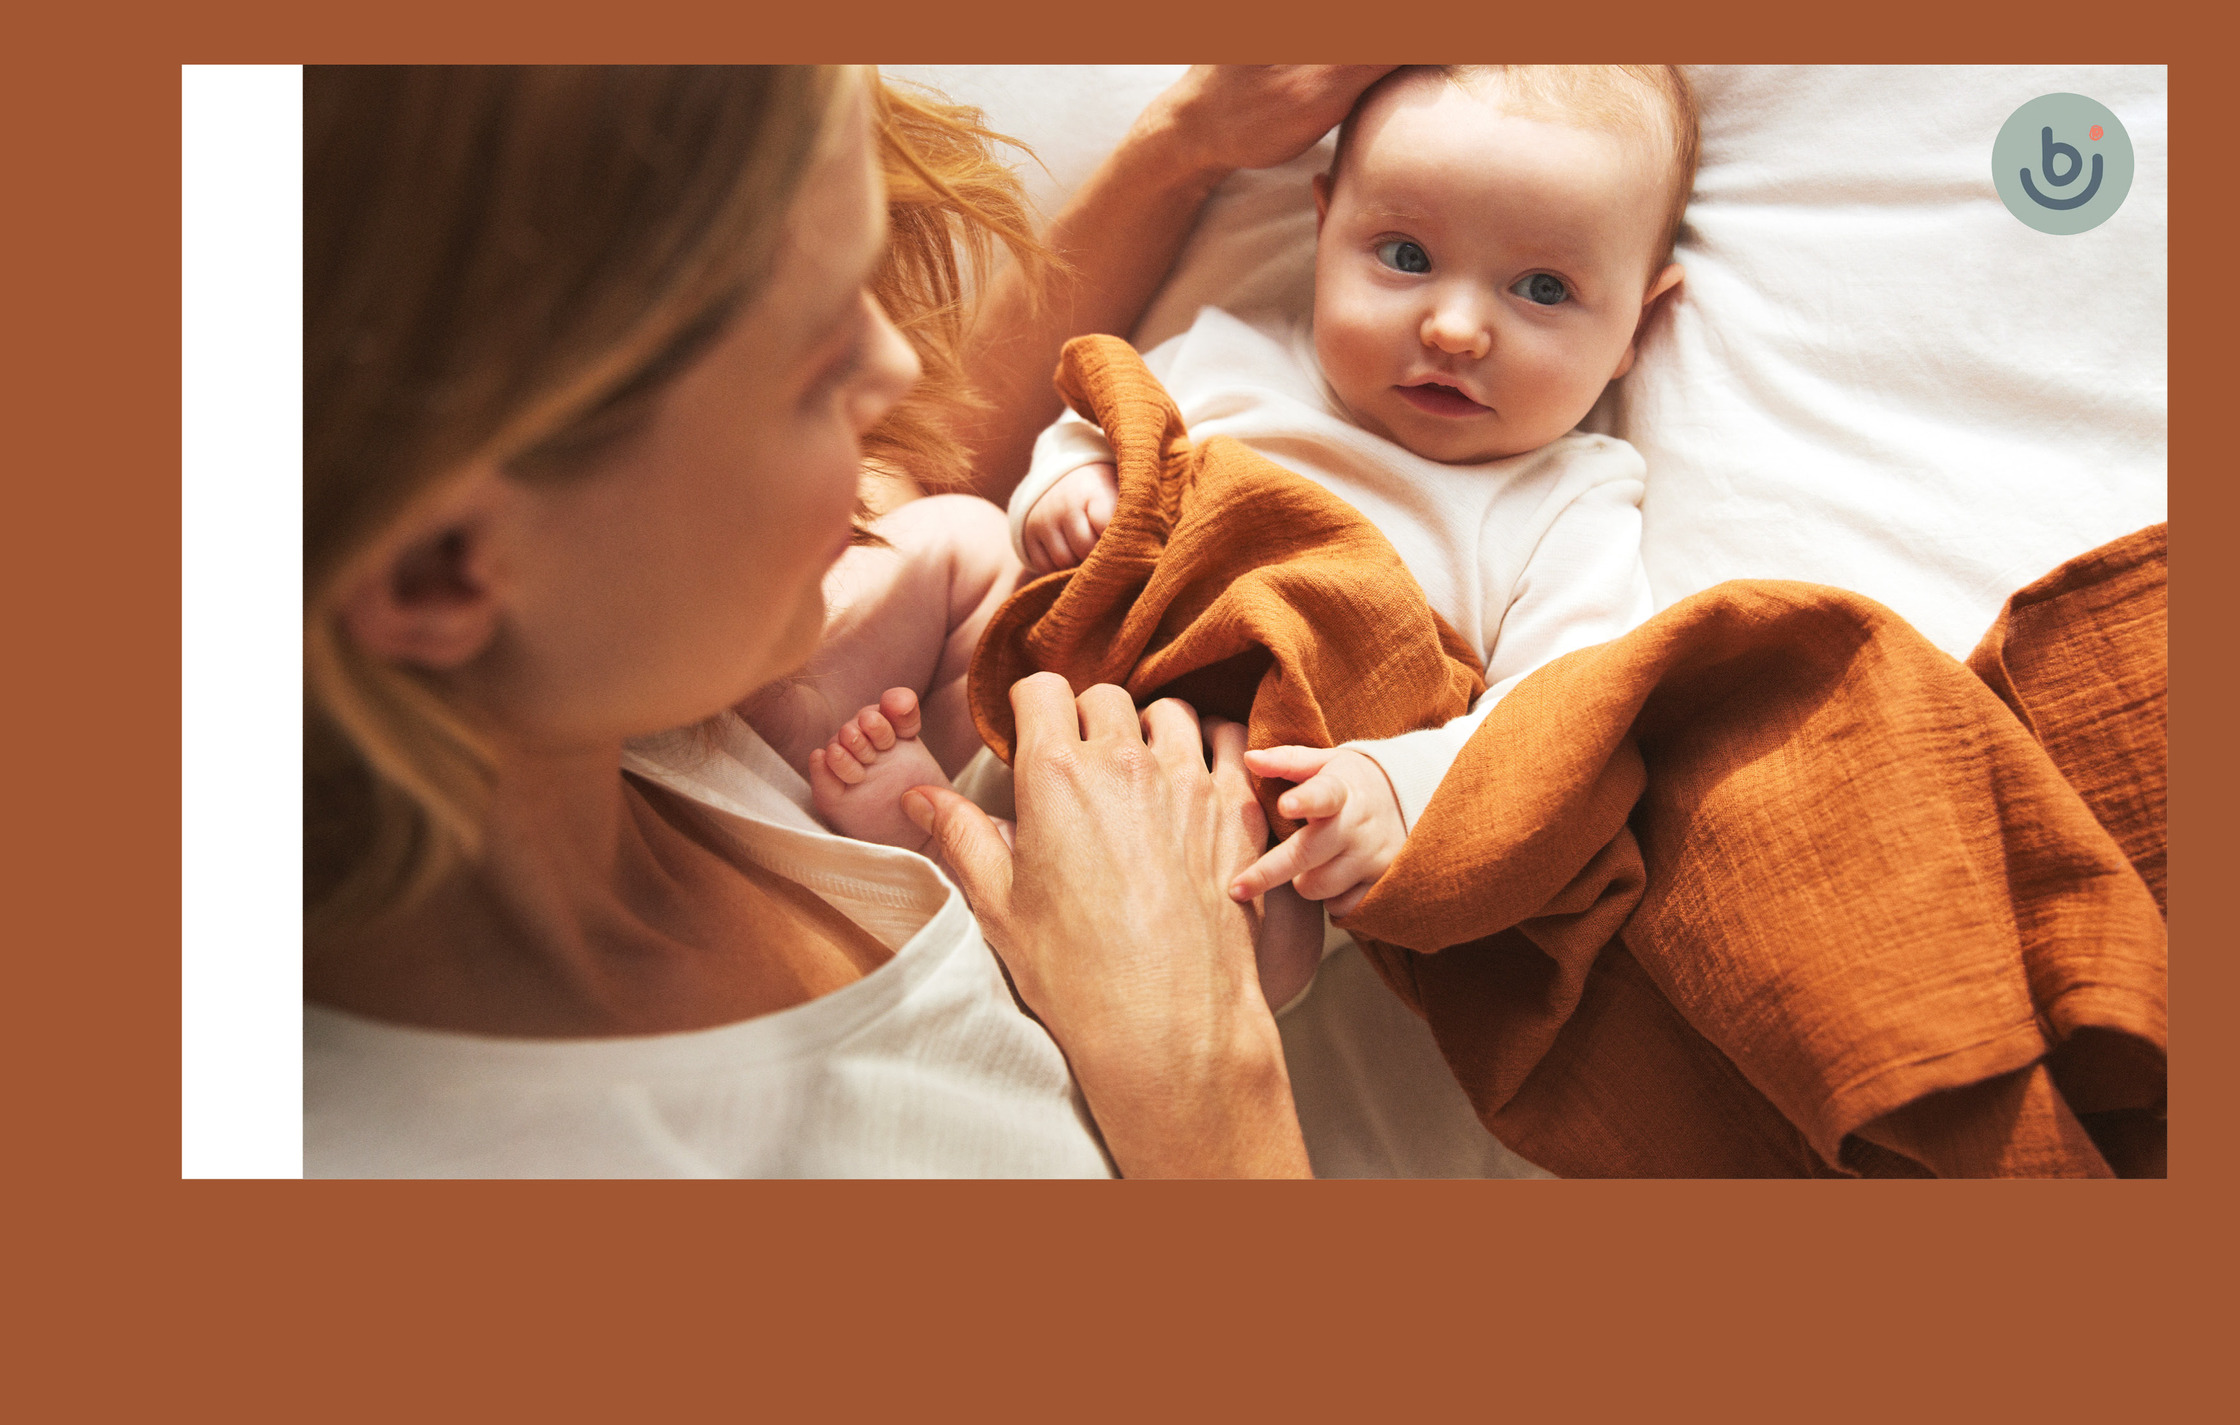 a woman is holding a baby in a bed with an orange blanket